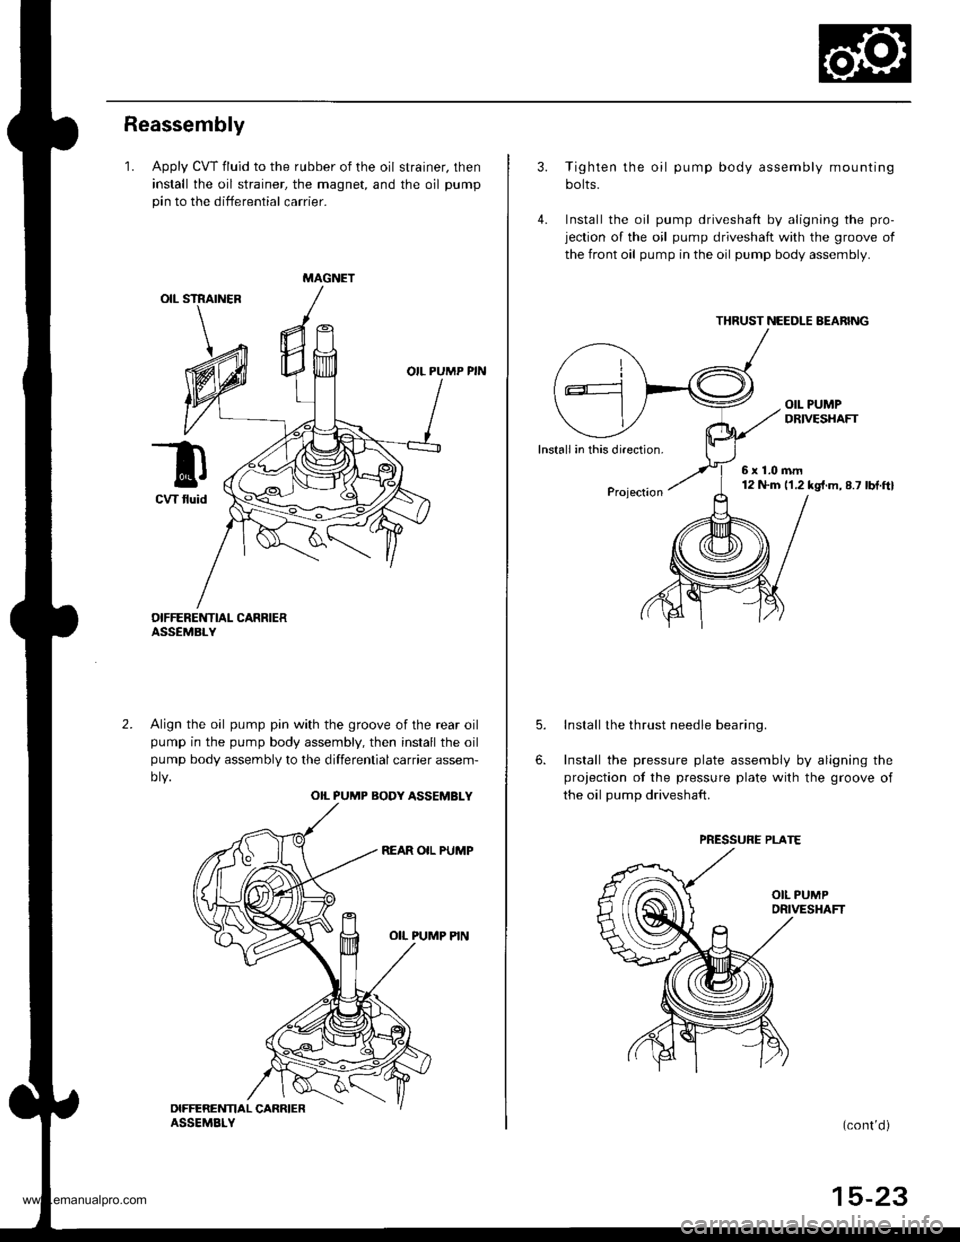 HONDA CR-V 1998 RD1-RD3 / 1.G Workshop Manual 
Reassembly
1. Apply CVT fluid to the rubber of the oil strainer, then
install the oil strainer, the magnet, and the oil pump
pin to the differential carrier.
OIL PUMP PIN
DIFFERE]TTIAL CARRIERASSEMBL